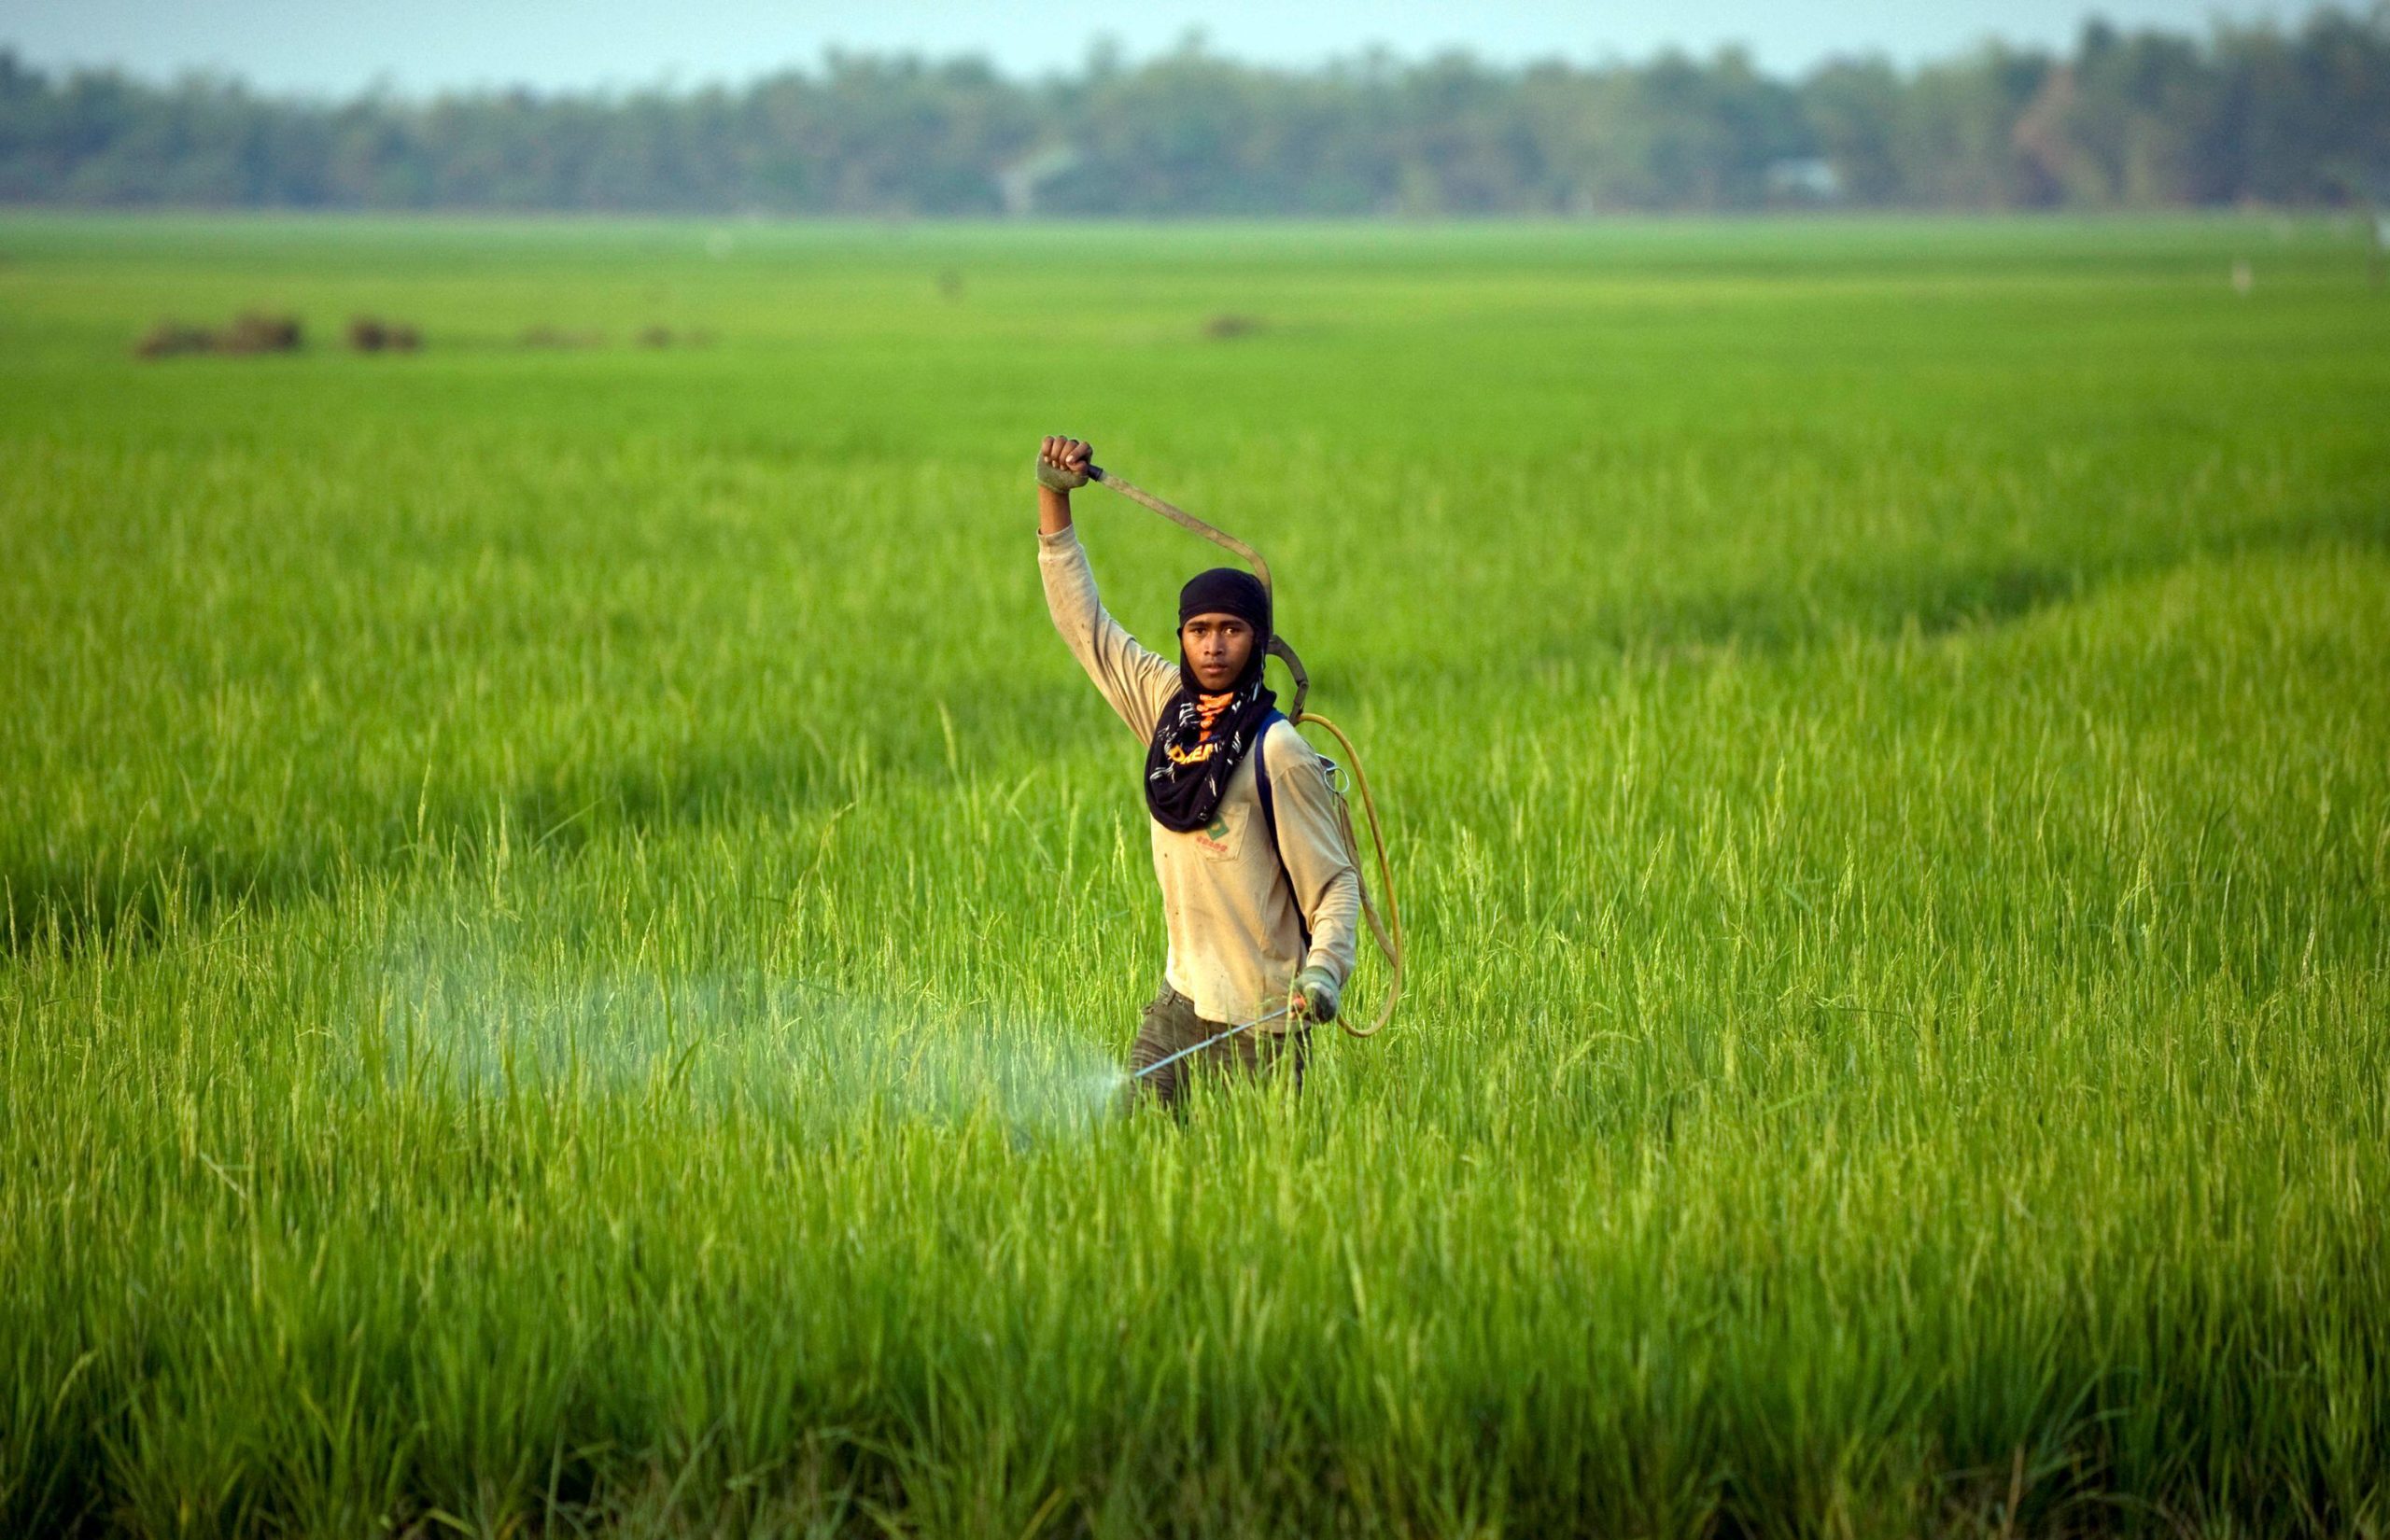 Farmer Som Boo sprays insecticide on his rice field in Reang Kesei, located in Cambodia's western Battambang province February 10, 2009. REUTERS/Adrees Latif (CAMBODIA)